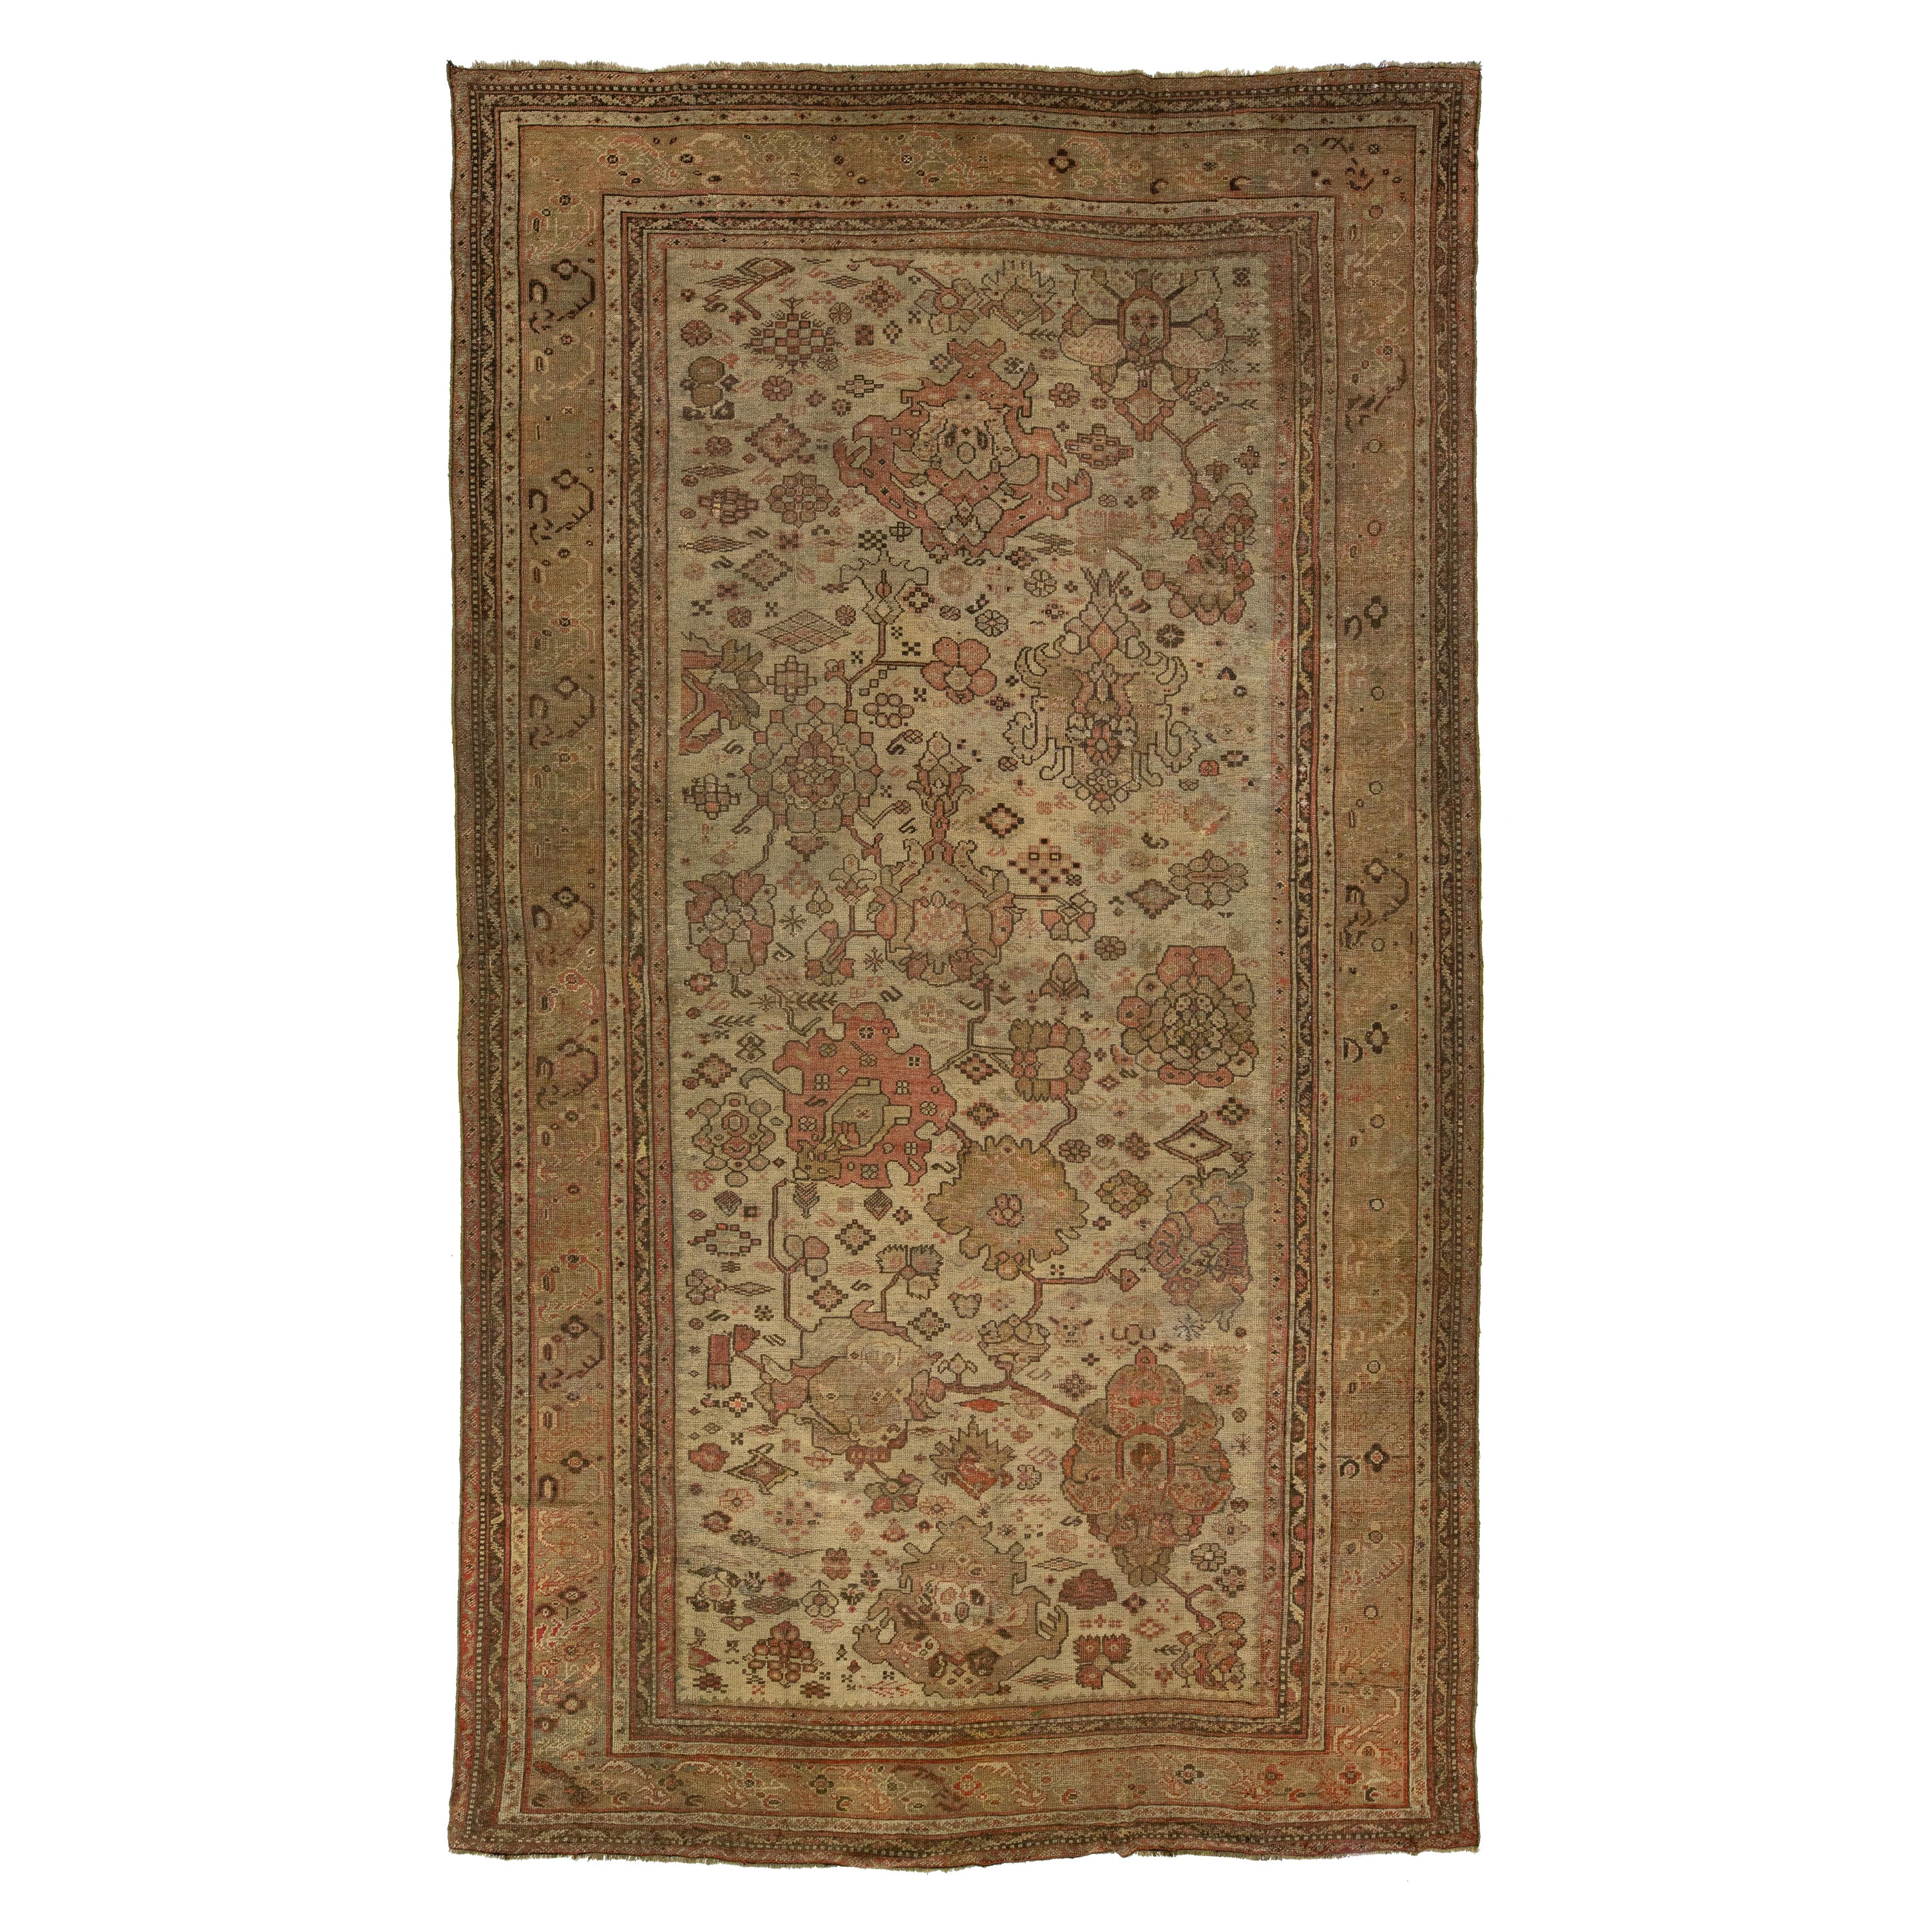 Brown Turkish Antique Oushak Wool Rug with Allover Floral Motif From The 1890's For Sale